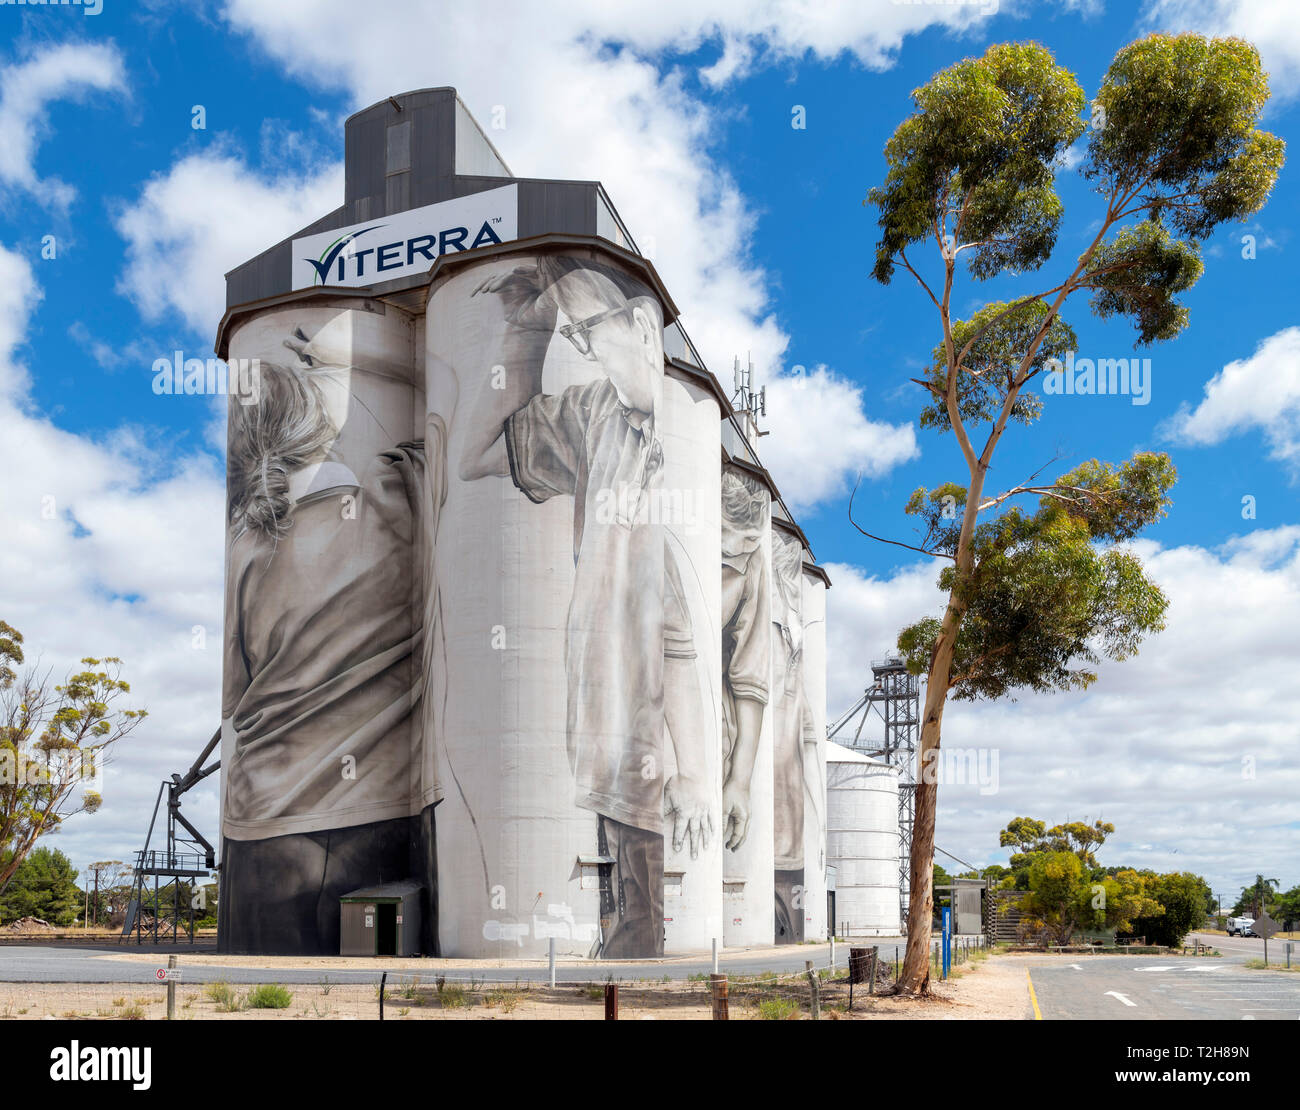 Coonalpyn Silo Mural. Hope for the Future mural by Guido Van Halten, Coonalpyn, South Australia, Australia Stock Photo